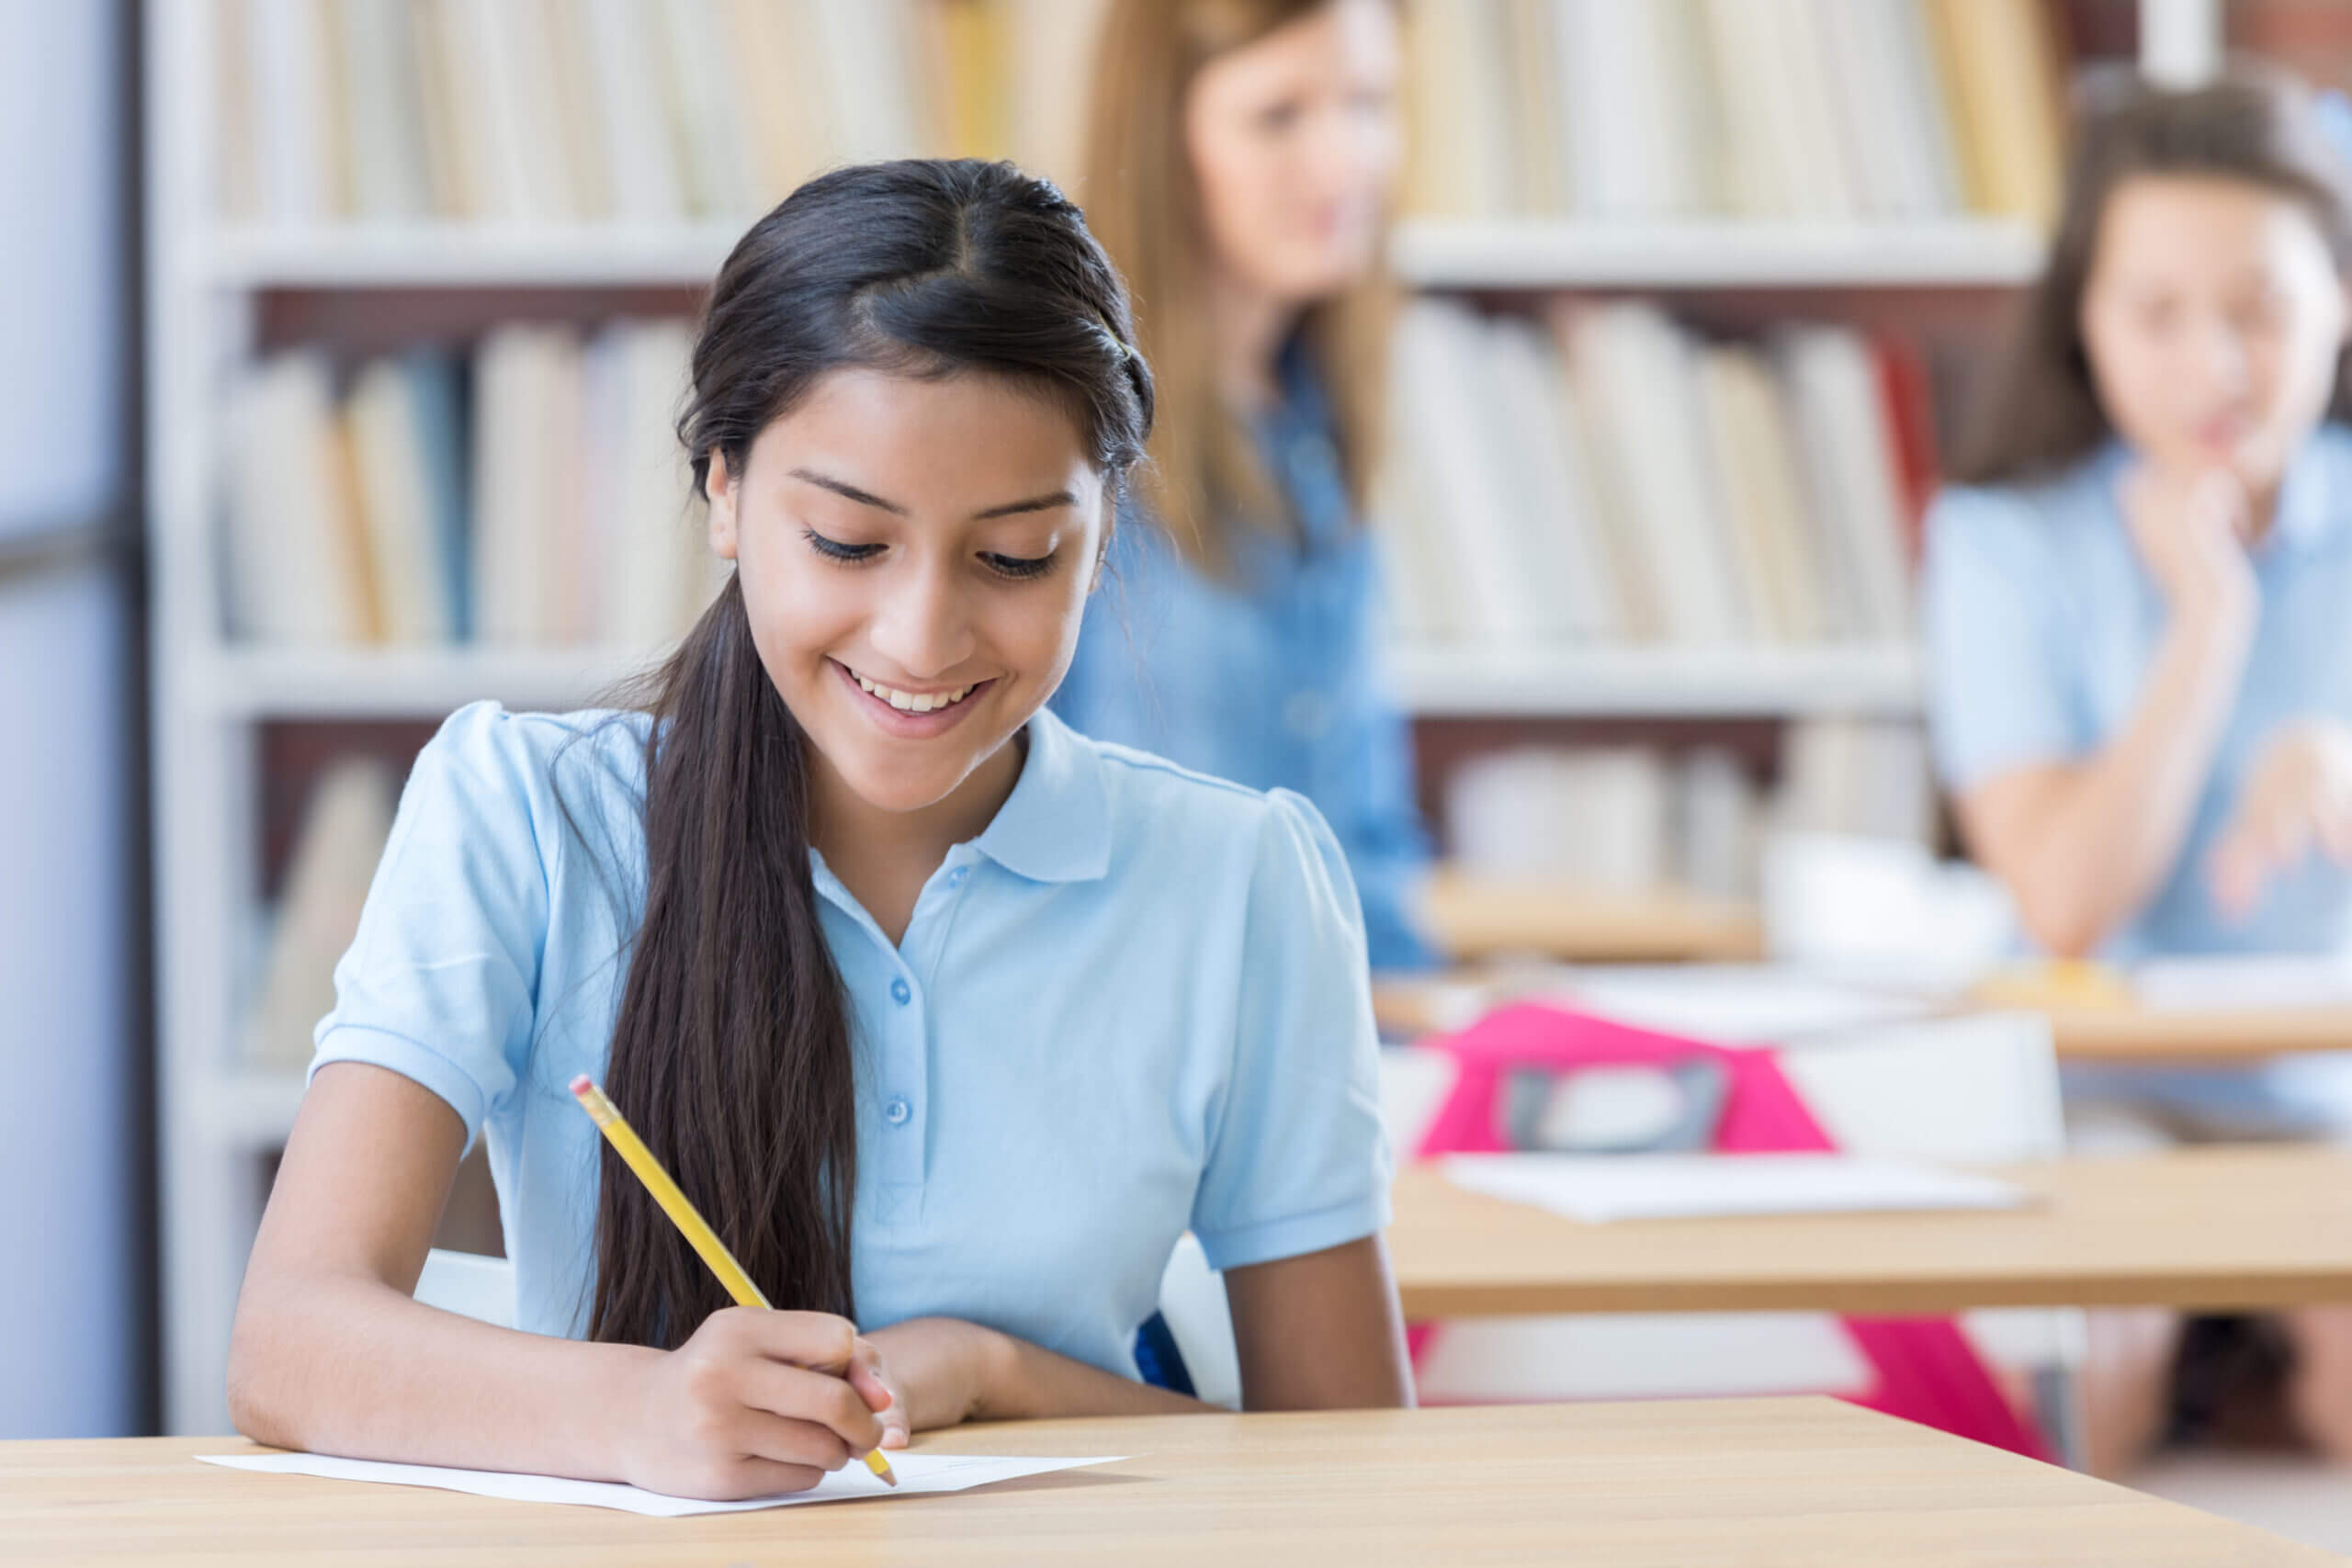 Happy Hispanic STEM schoolgirl smiles confidently while working on an assignment in the library or classroom. A teacher is working with a student in the background.